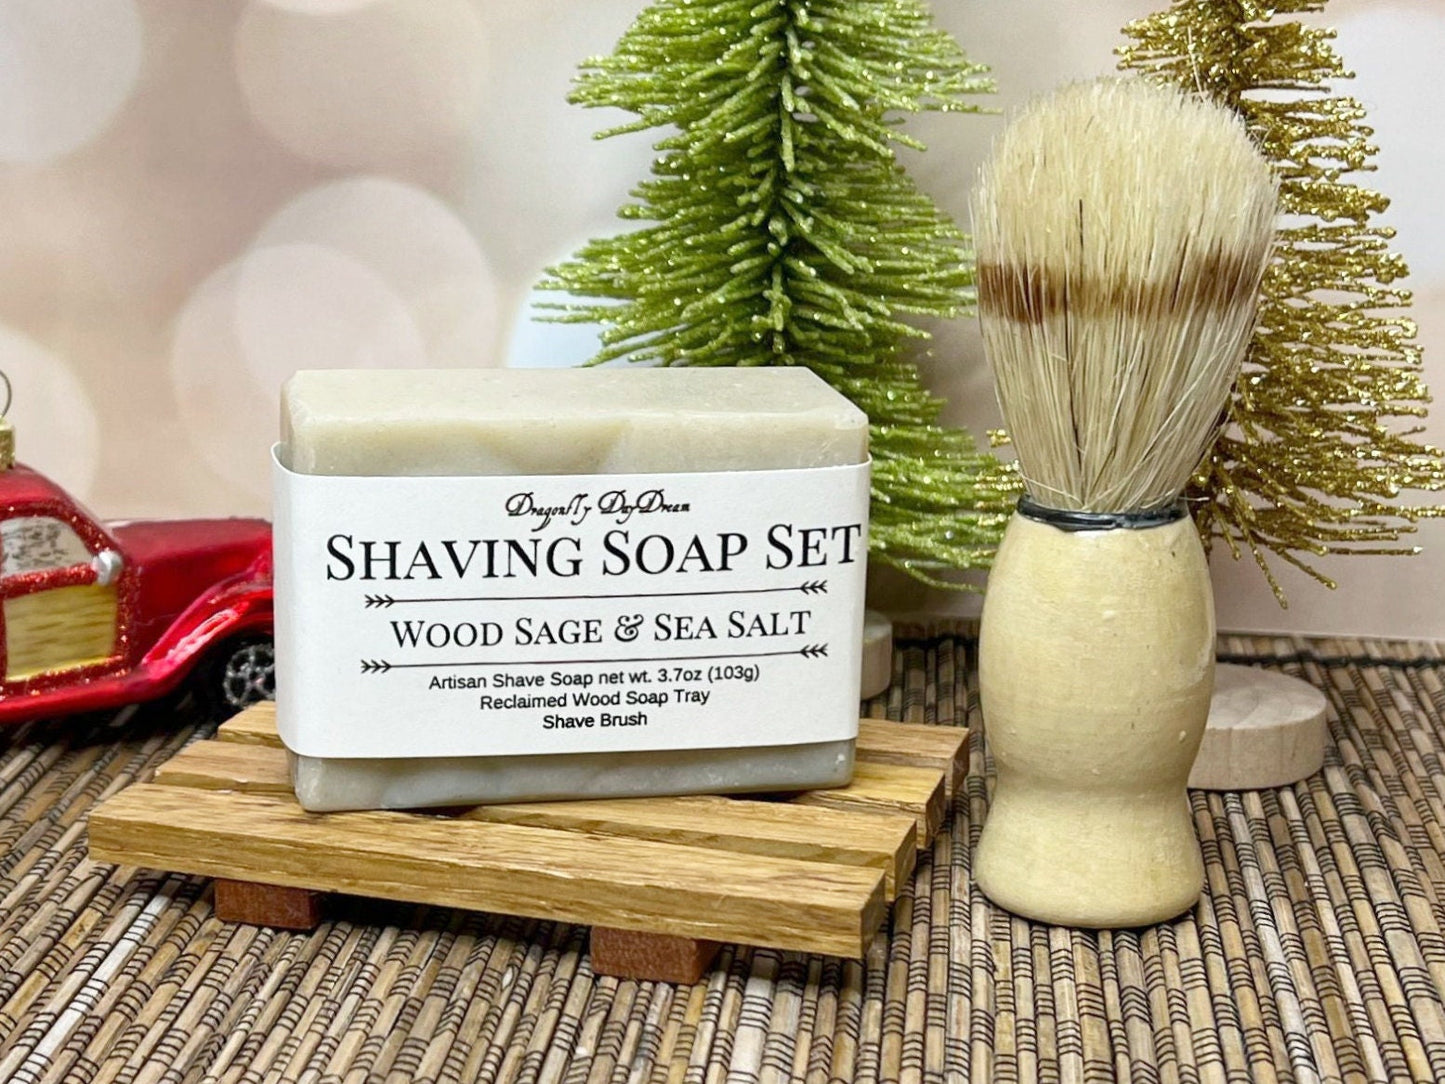 Wood sage and sea salt soap on a reclaimed wood soap tray with a shave brush beside it. Background features blurred fairy lights, two sparkly trees, and a red truck ornament.